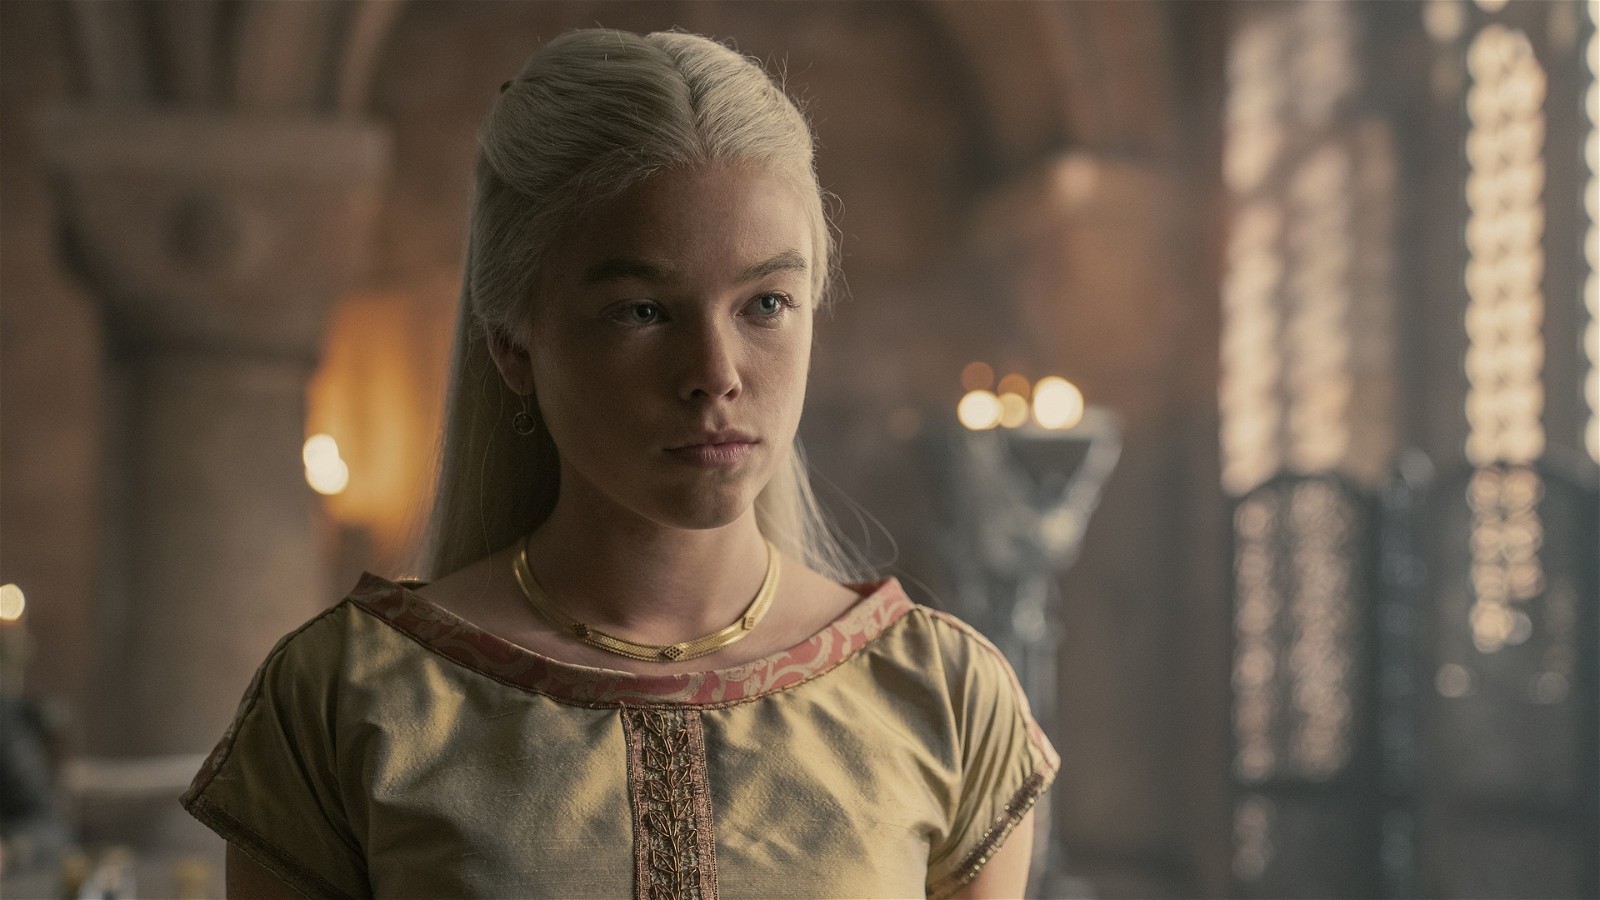 Milly Alcock has been praised for her role as Rhaenyra Targaryen.